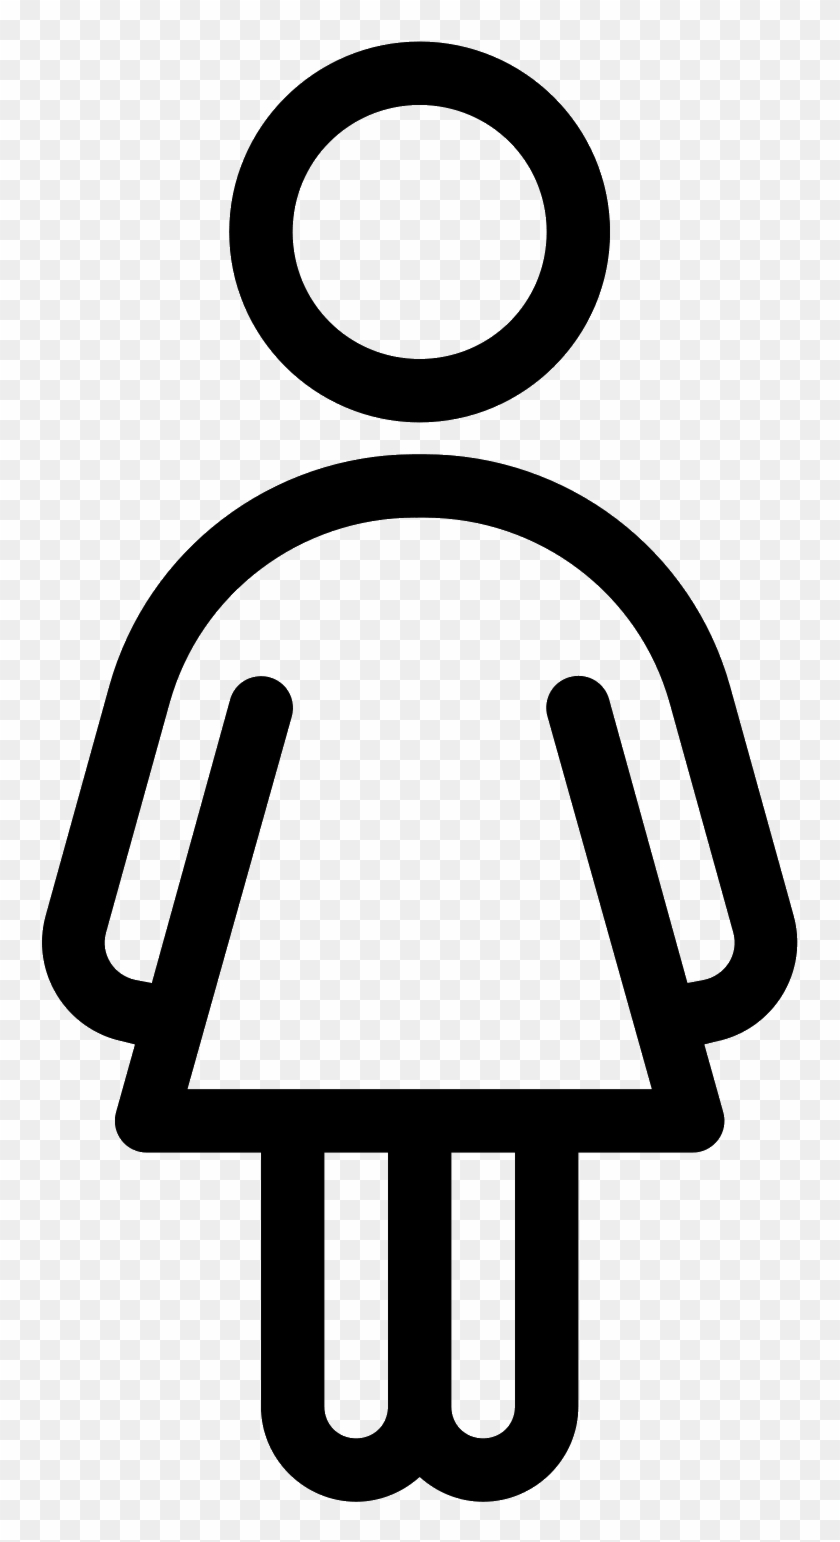 The Icon Is A Simplified Depiction Of A Female Humanoid - Woman Icon #1081531